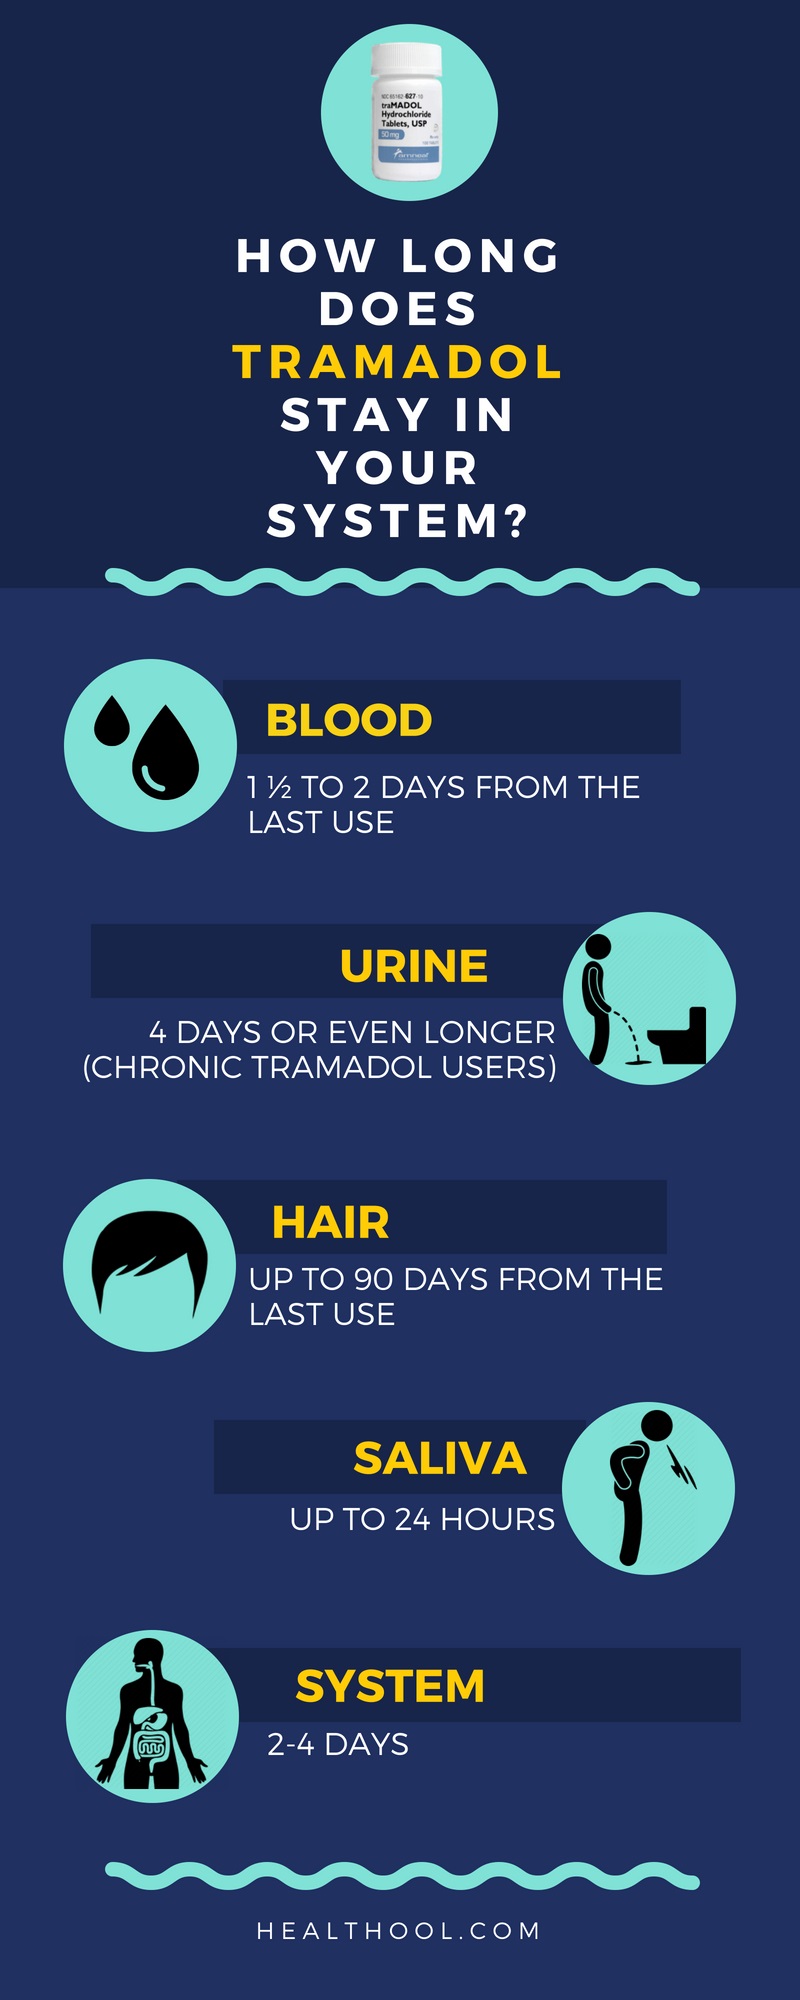 How long does Tramadol stay in your system infographic